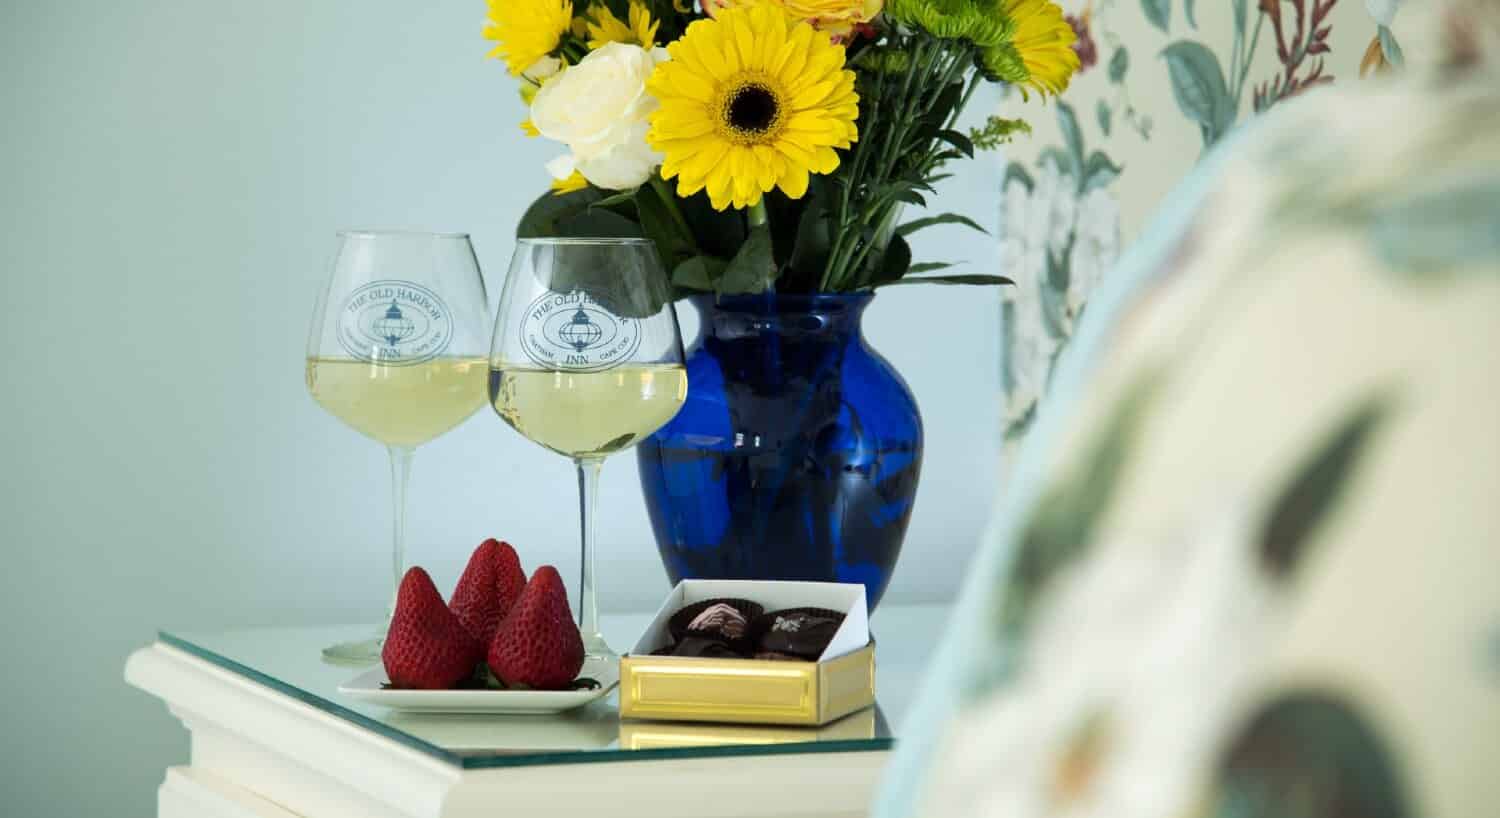 Two chocolates, strawberries, two glasses of wine and flowers in a blue vase on a glasstop table